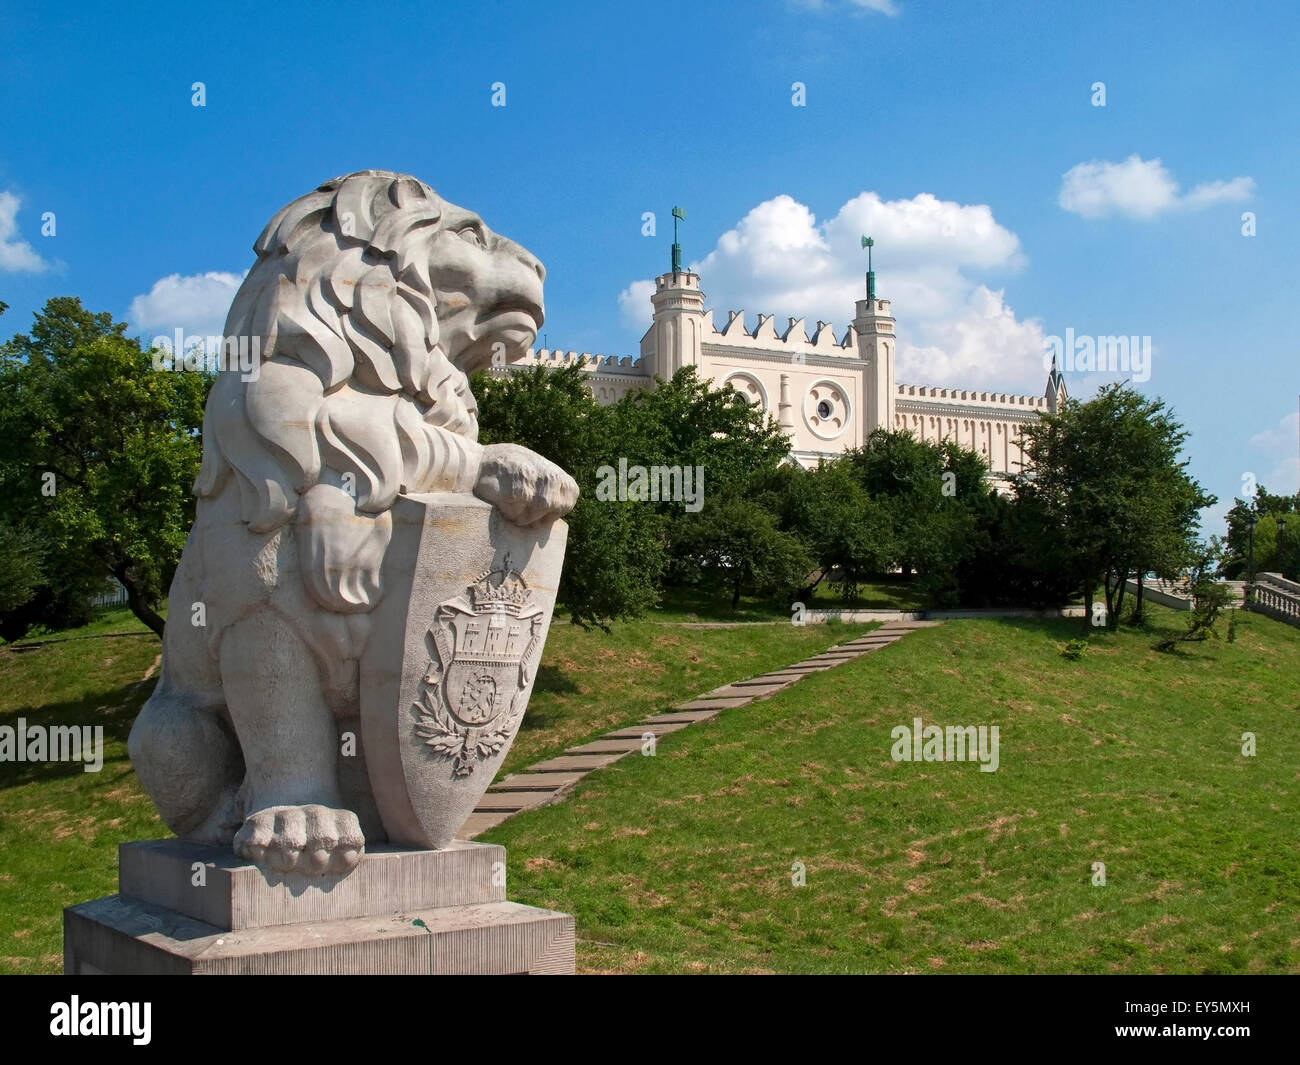 Lion statue by Lublin Royal Castle, Poland Stock Photo